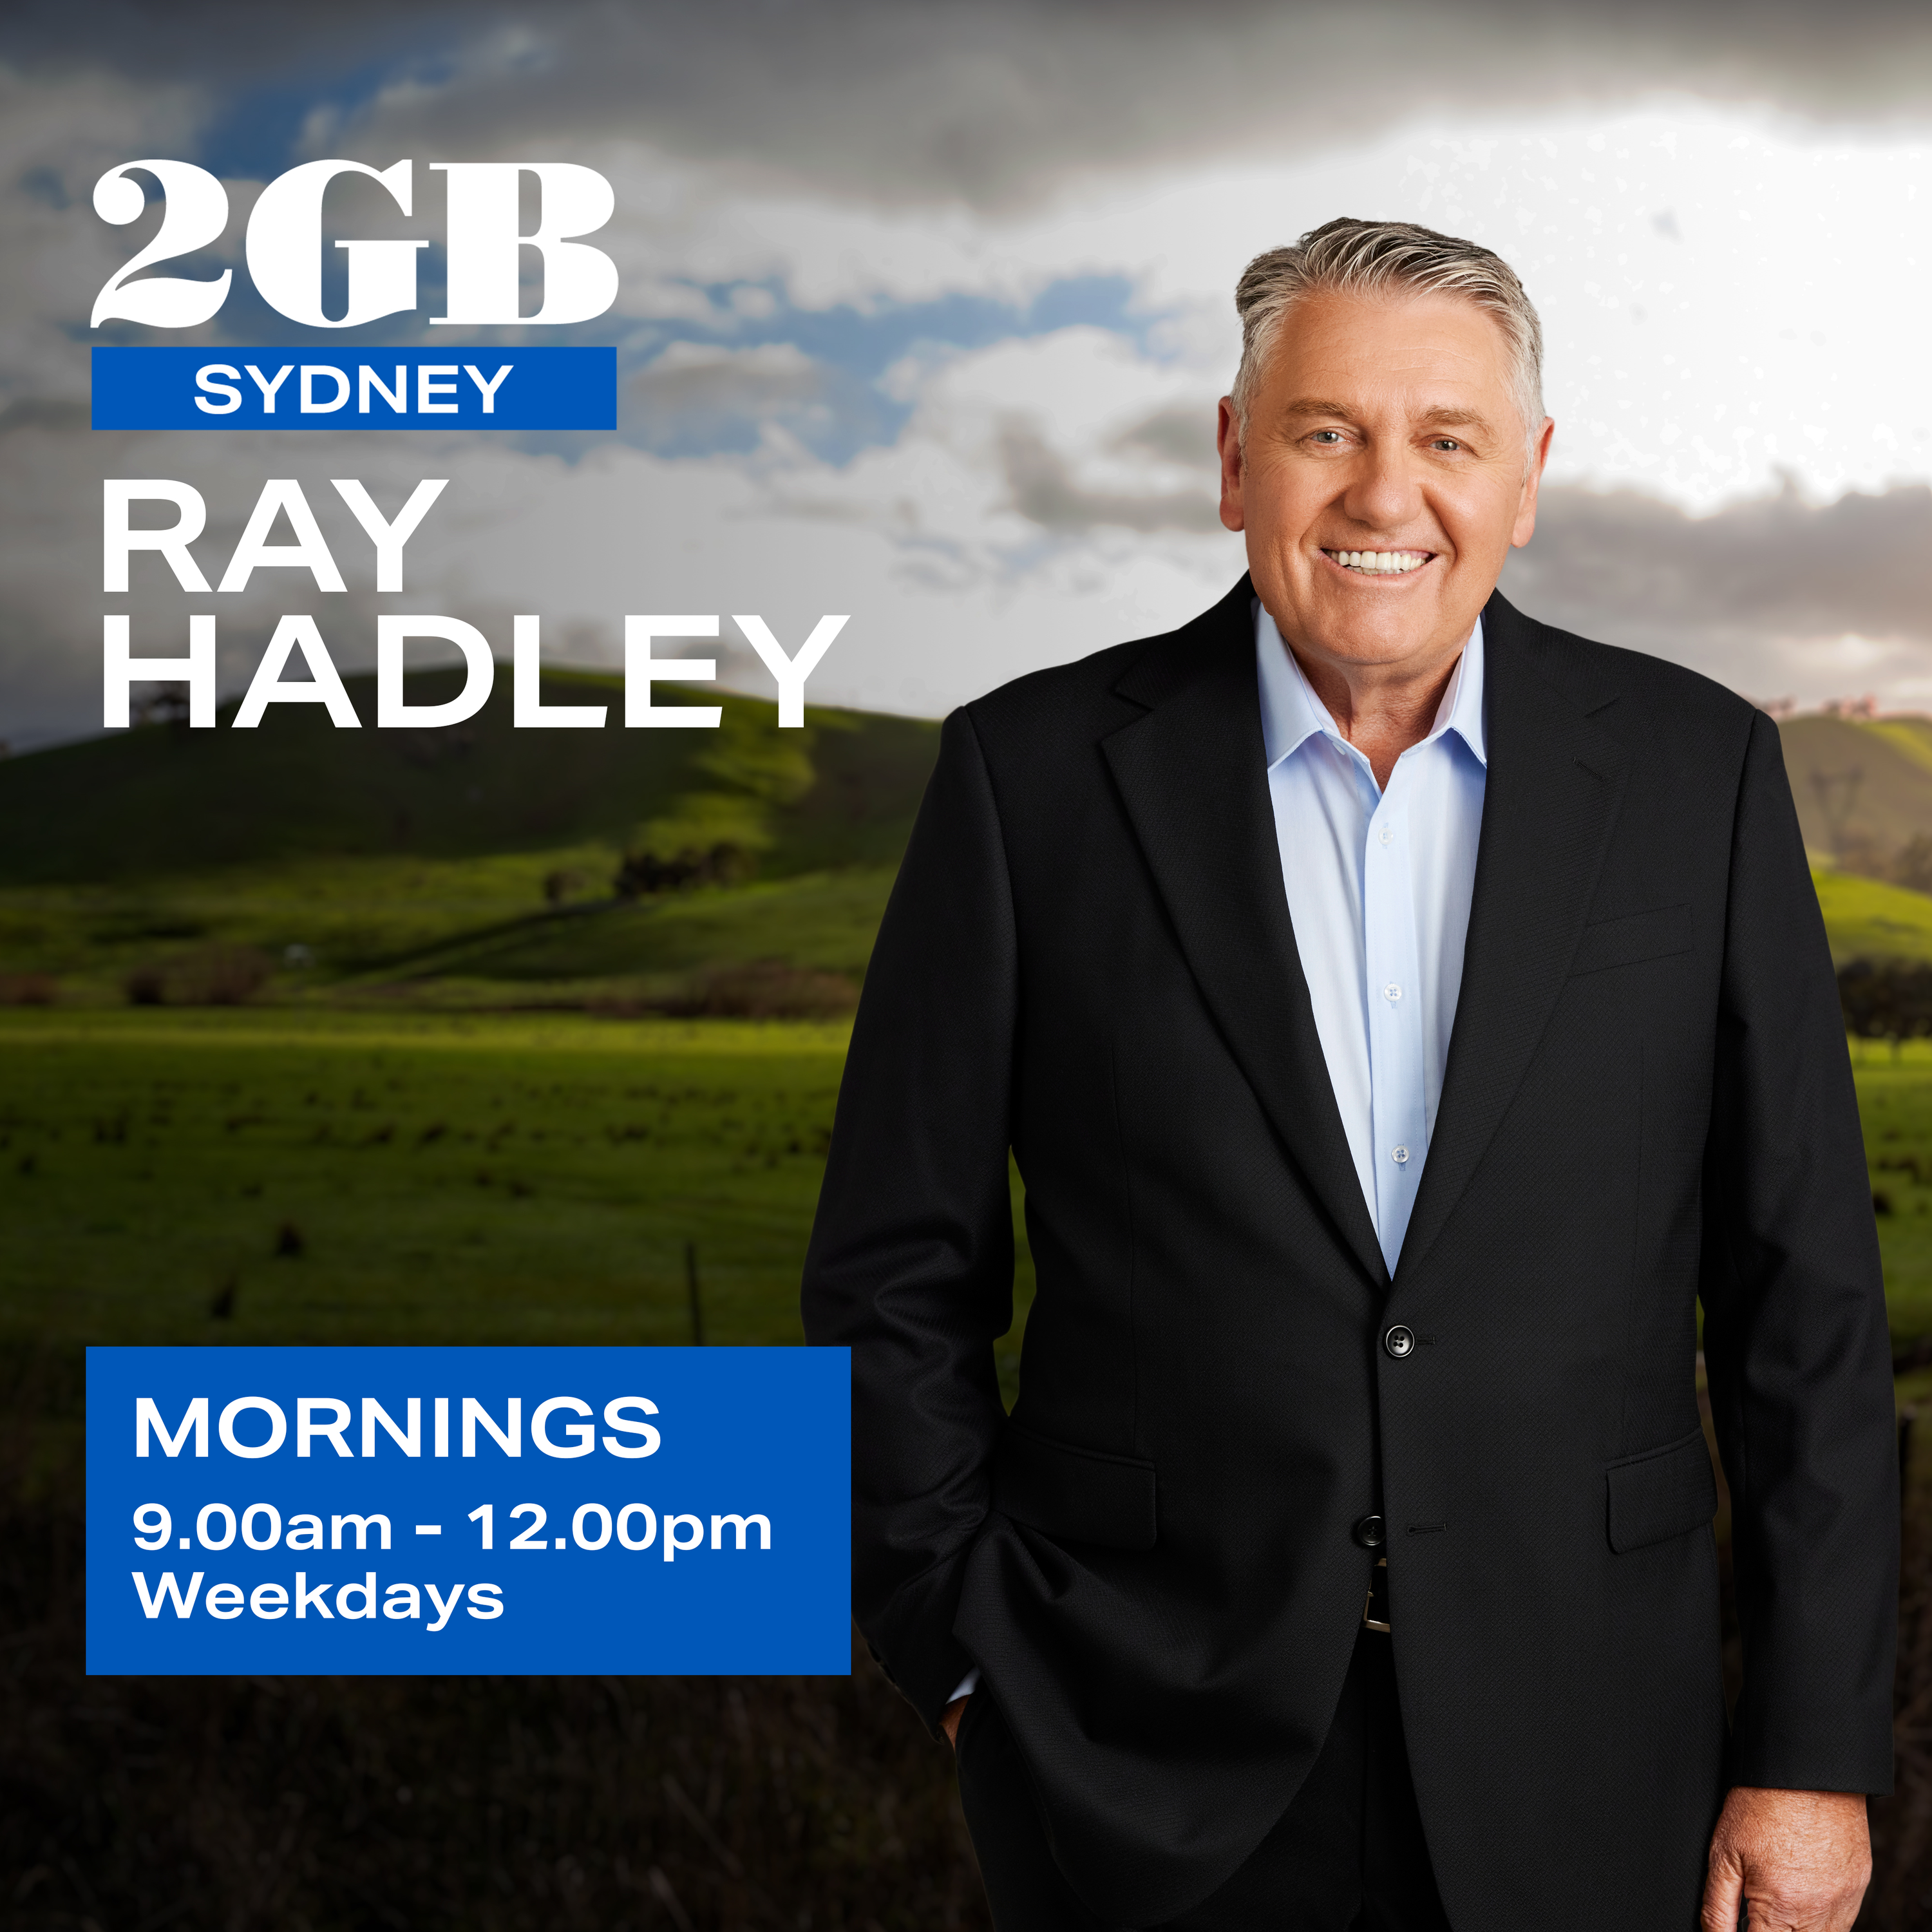 The Ray Hadley Morning Show - Full Show, April 21st